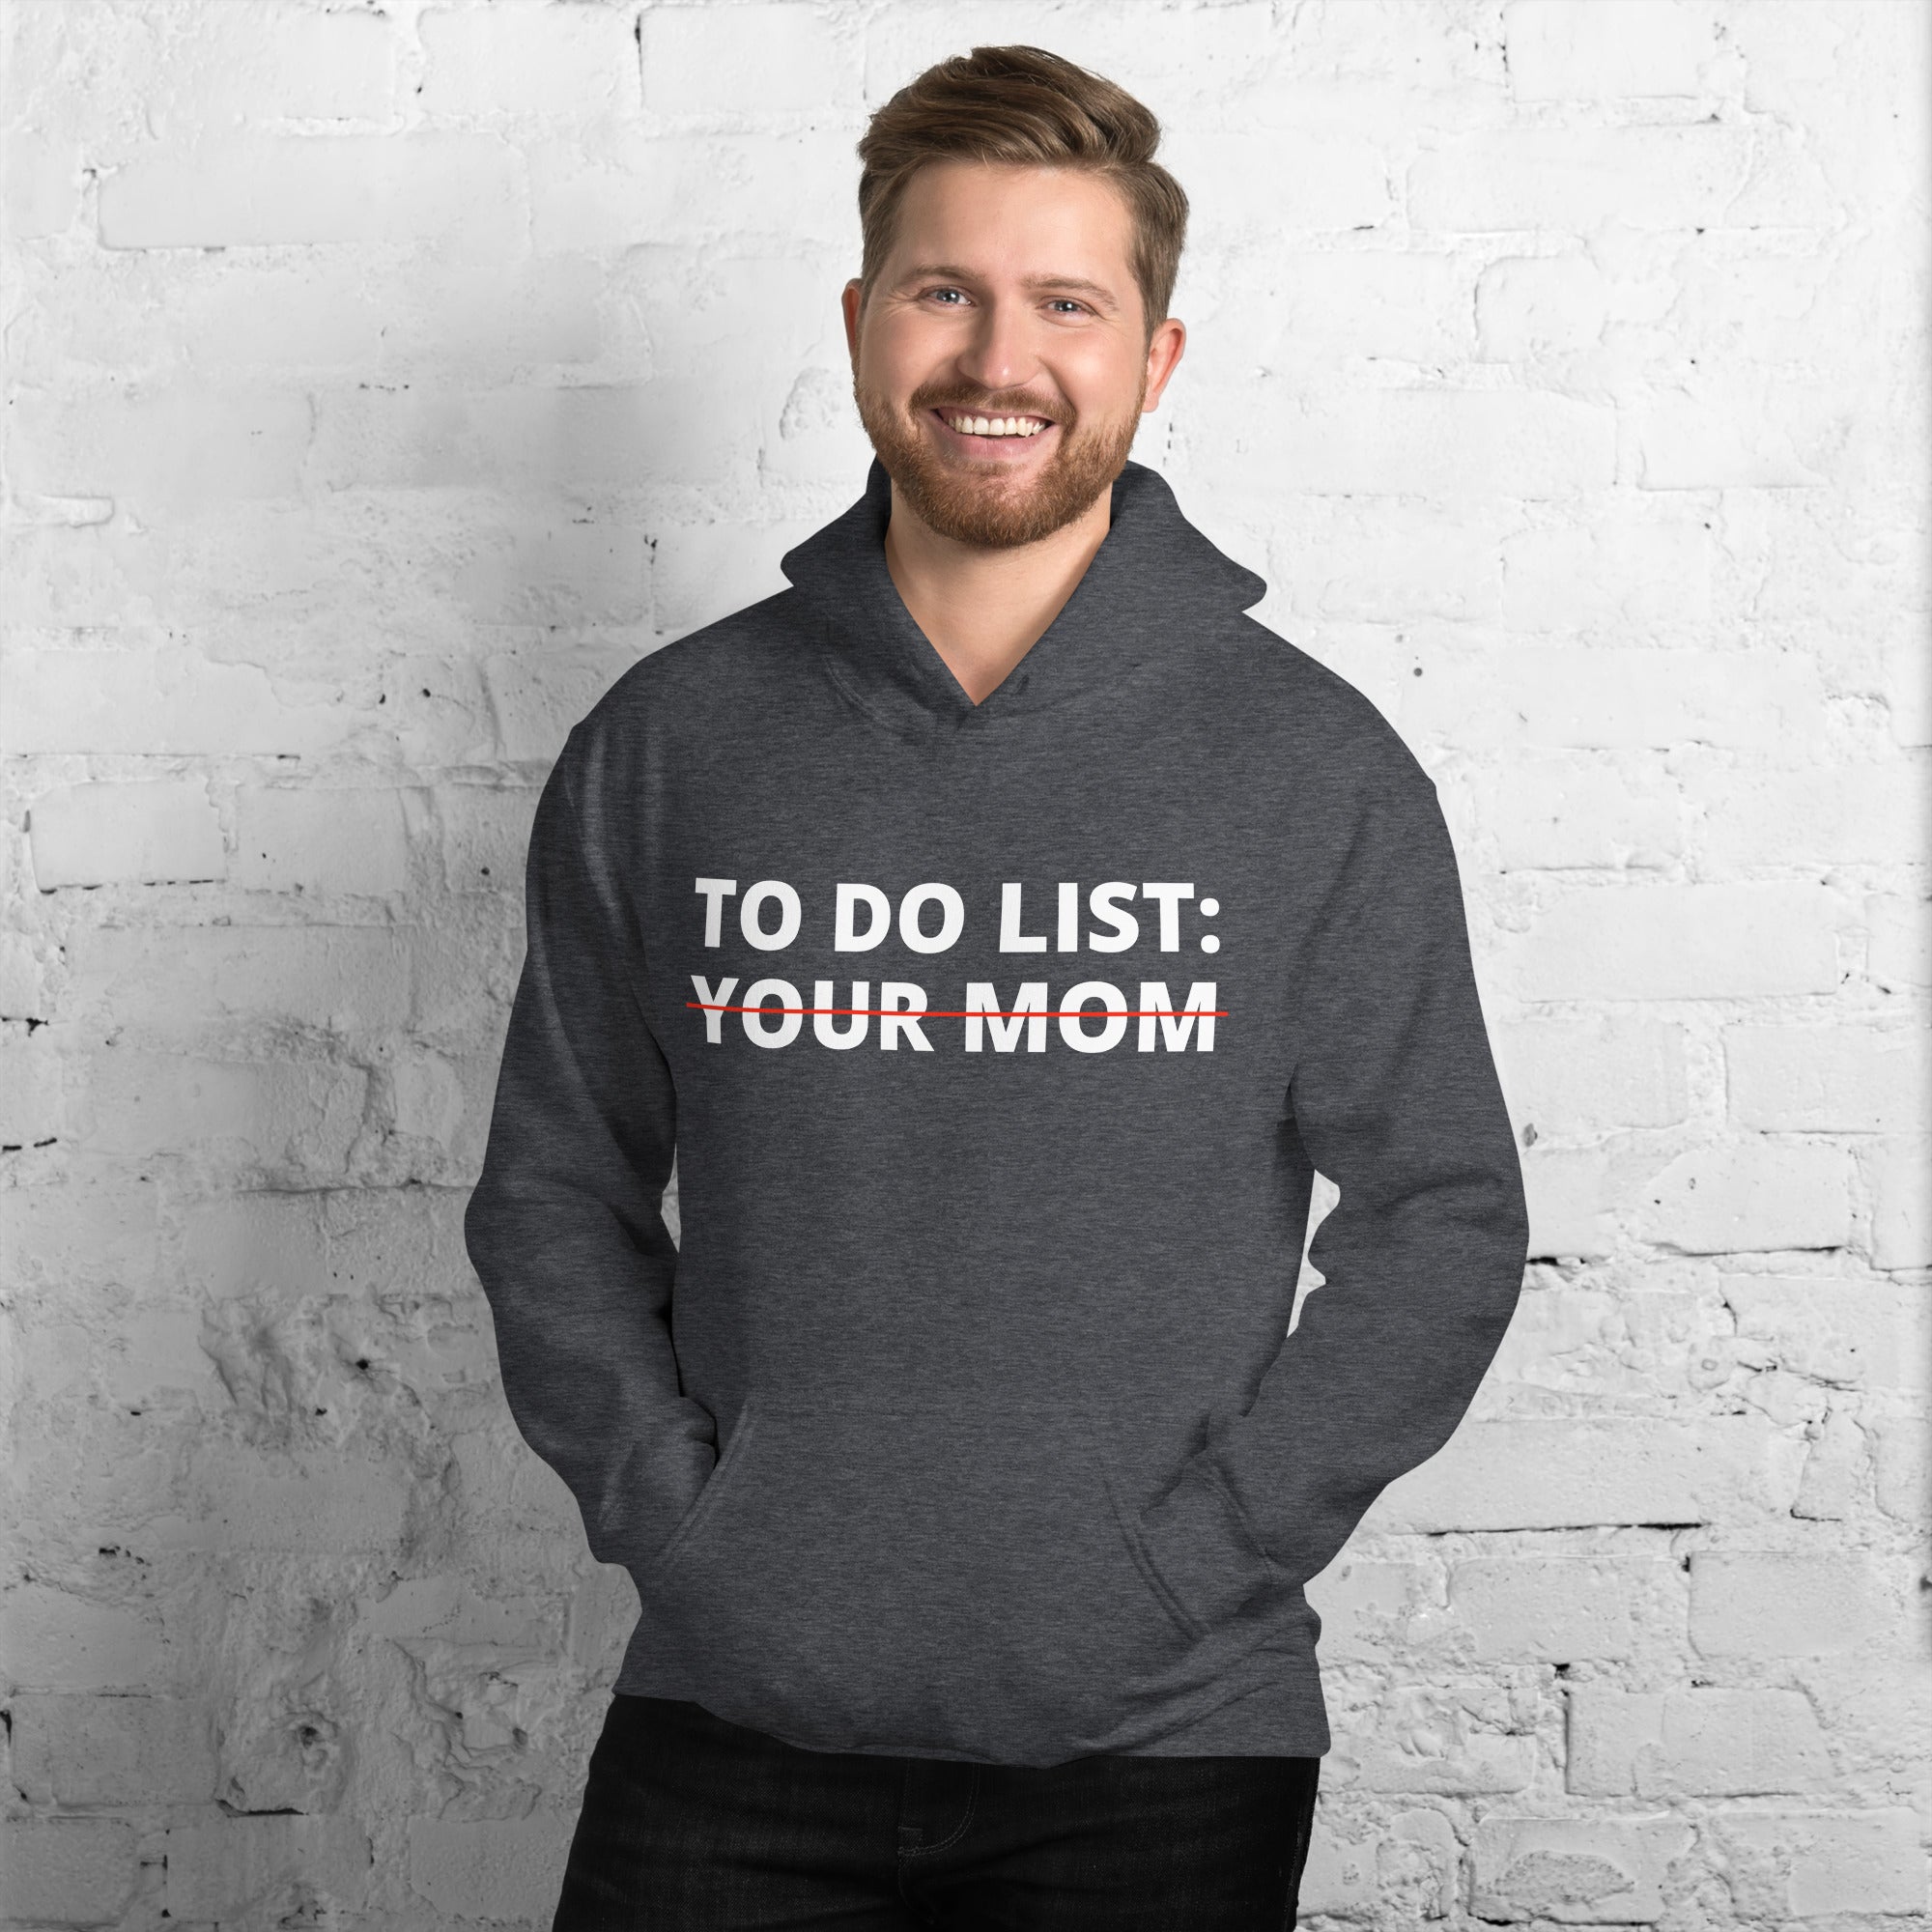 To Do List Your Mom, Funny Joke Hoodie, Sarcastic Shirt, Gag Hoodie, Sarcastic Sayings, Sarcasm Shirt, Sassy Gifts, Sarcastic Gifts for Men - Madeinsea©